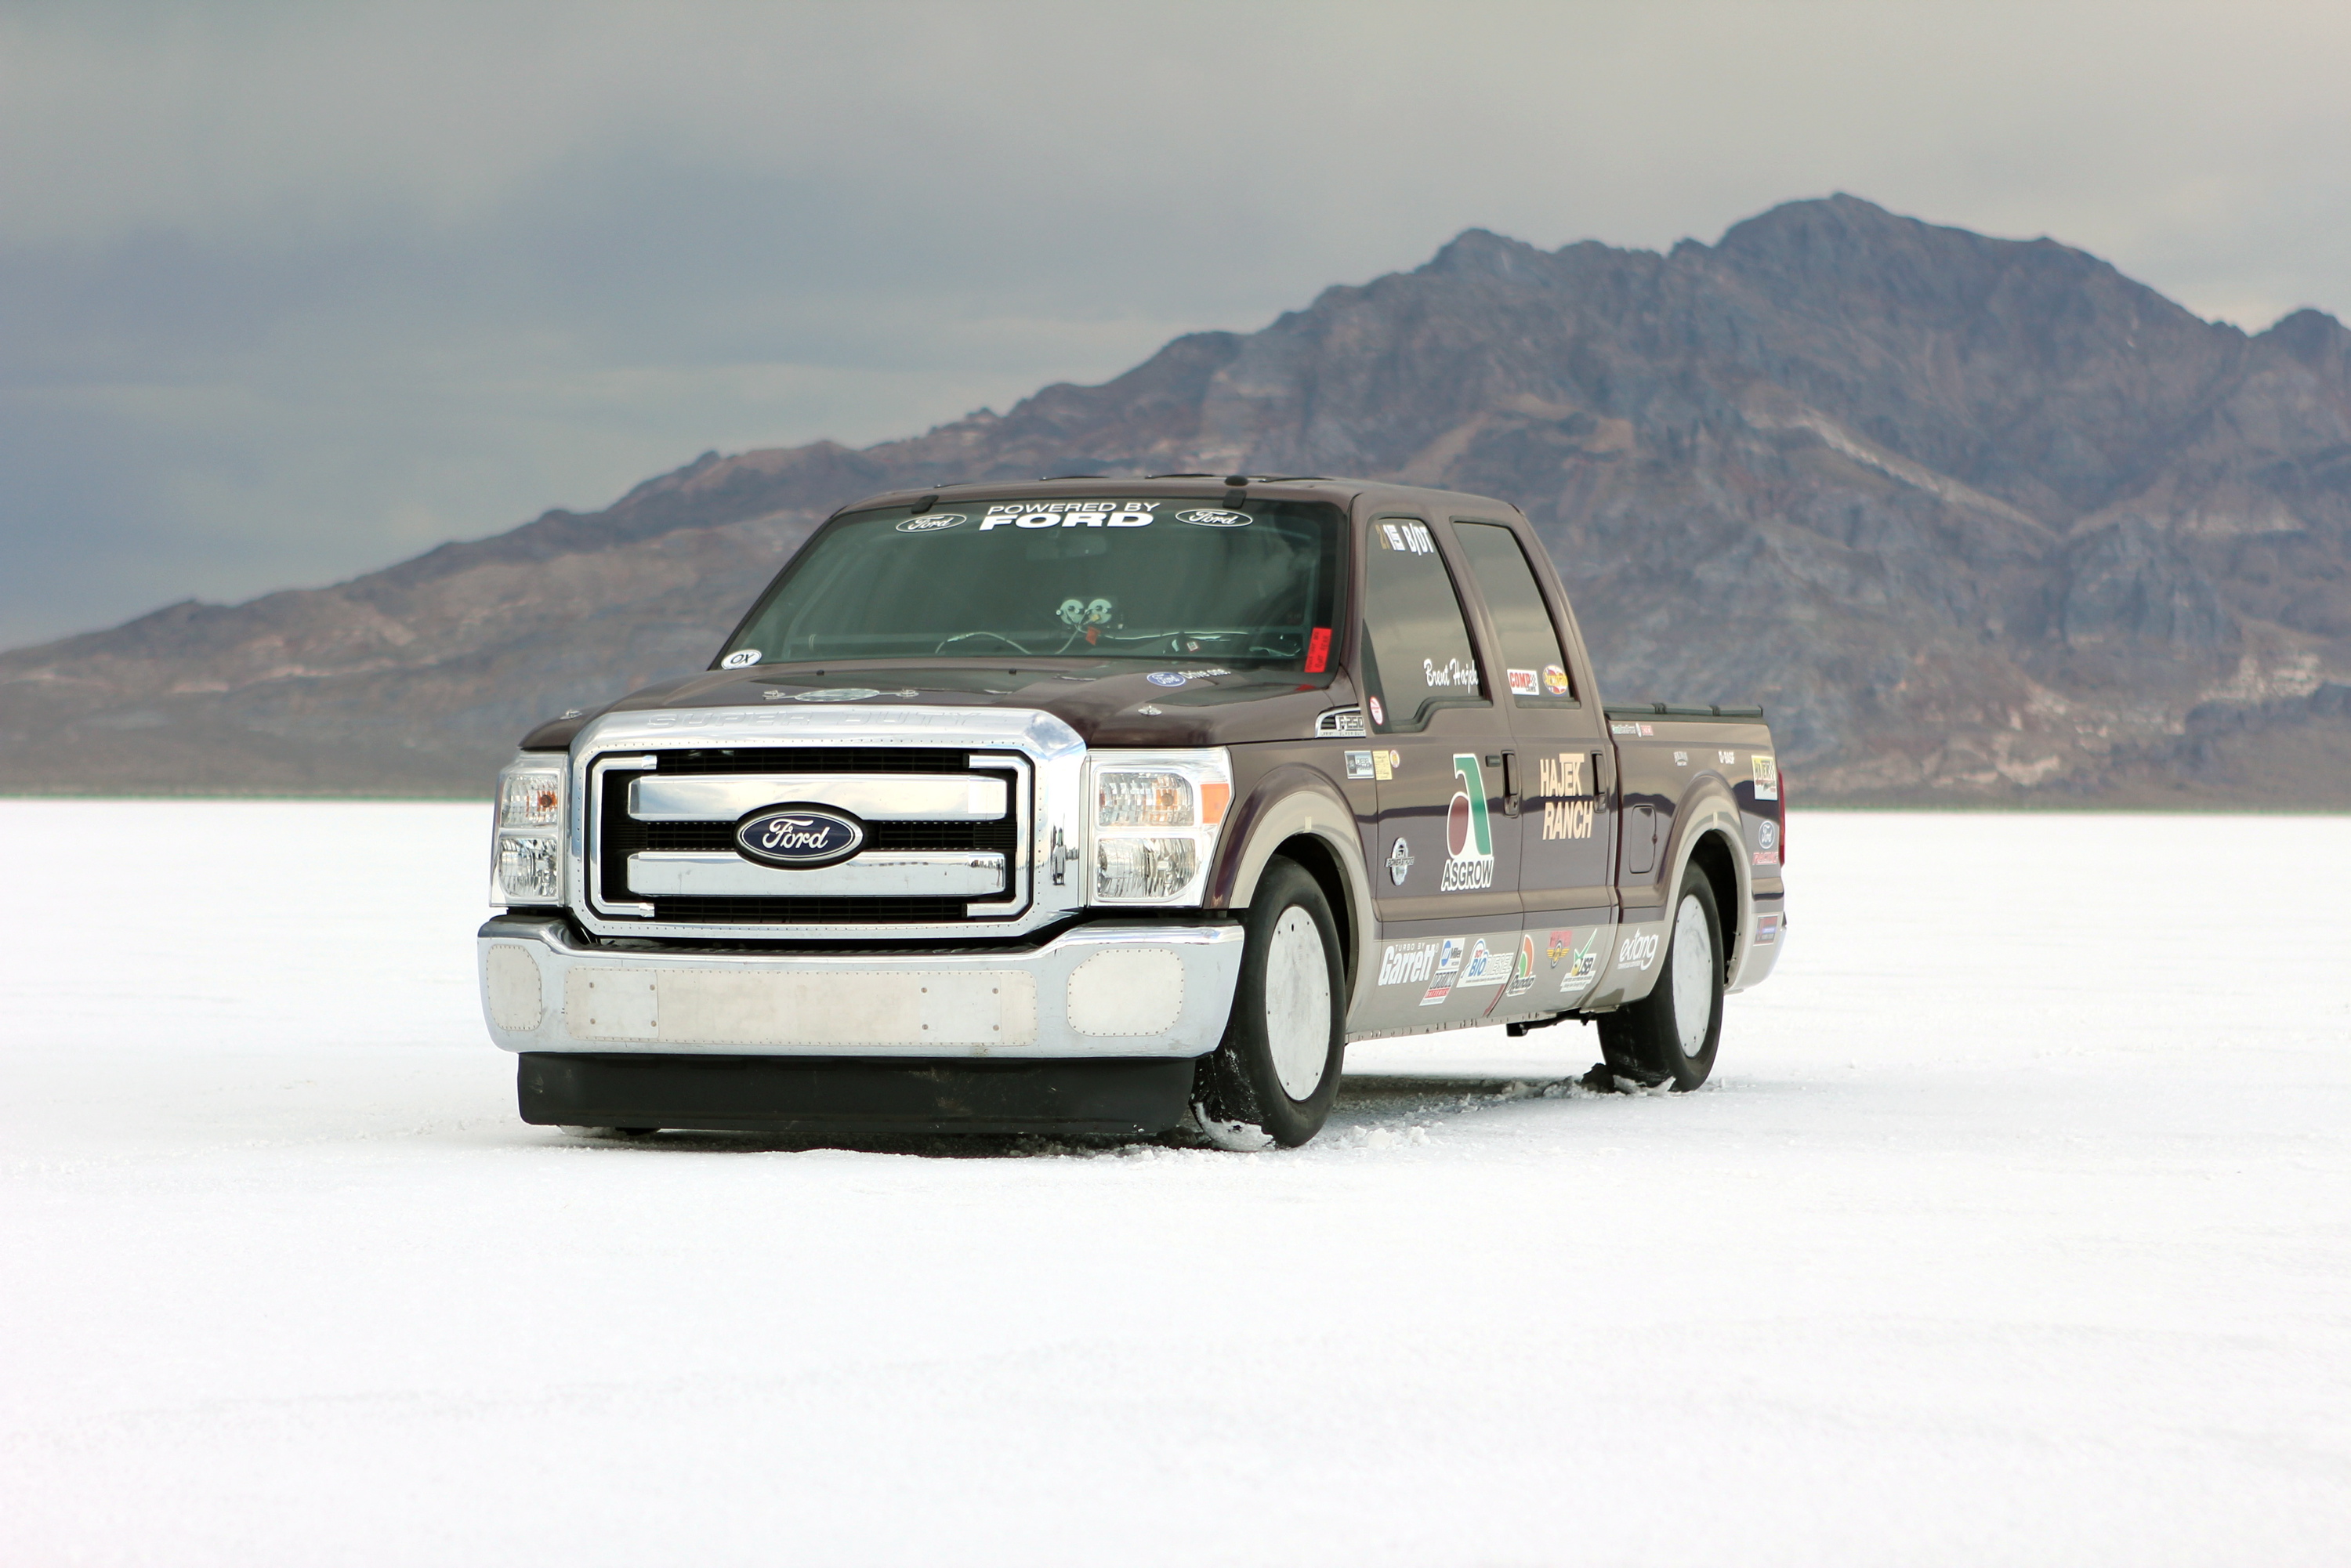 Diesel Land Speed Record: 171 MPH In A Ford F-250 Pickup!